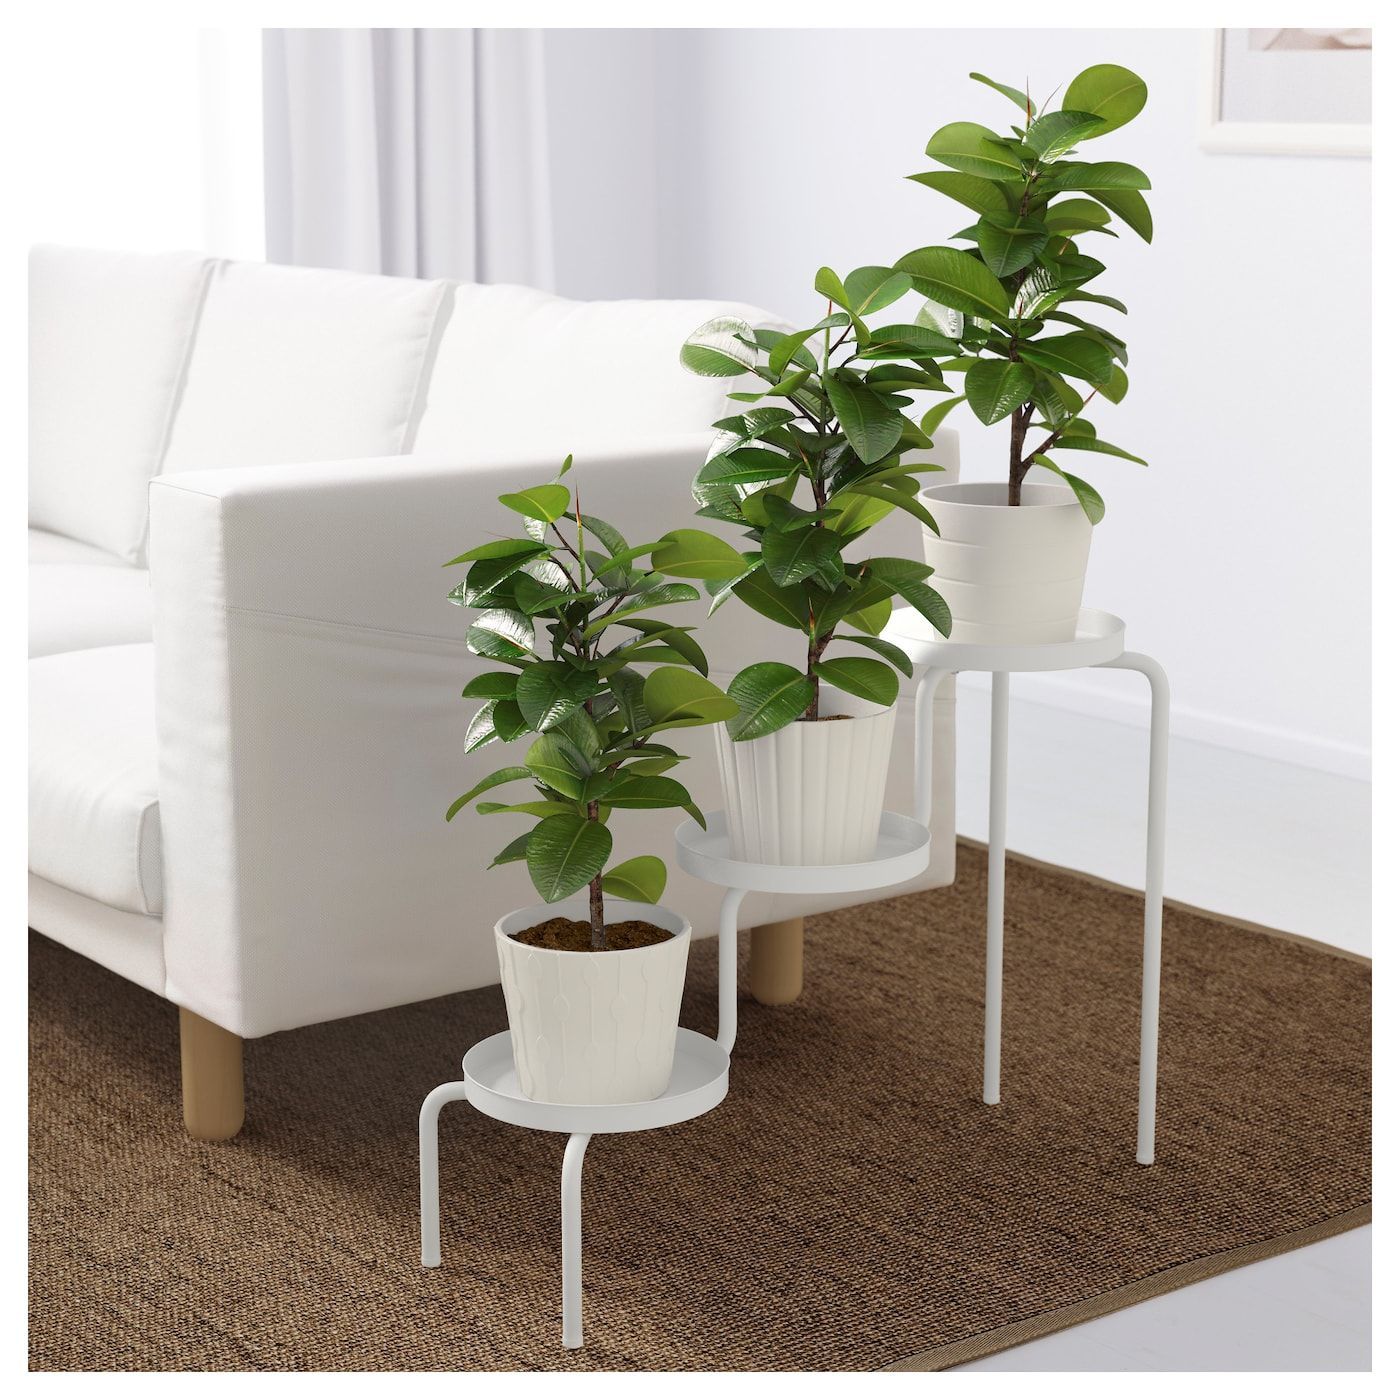 13 pidestall plants Stand ideas